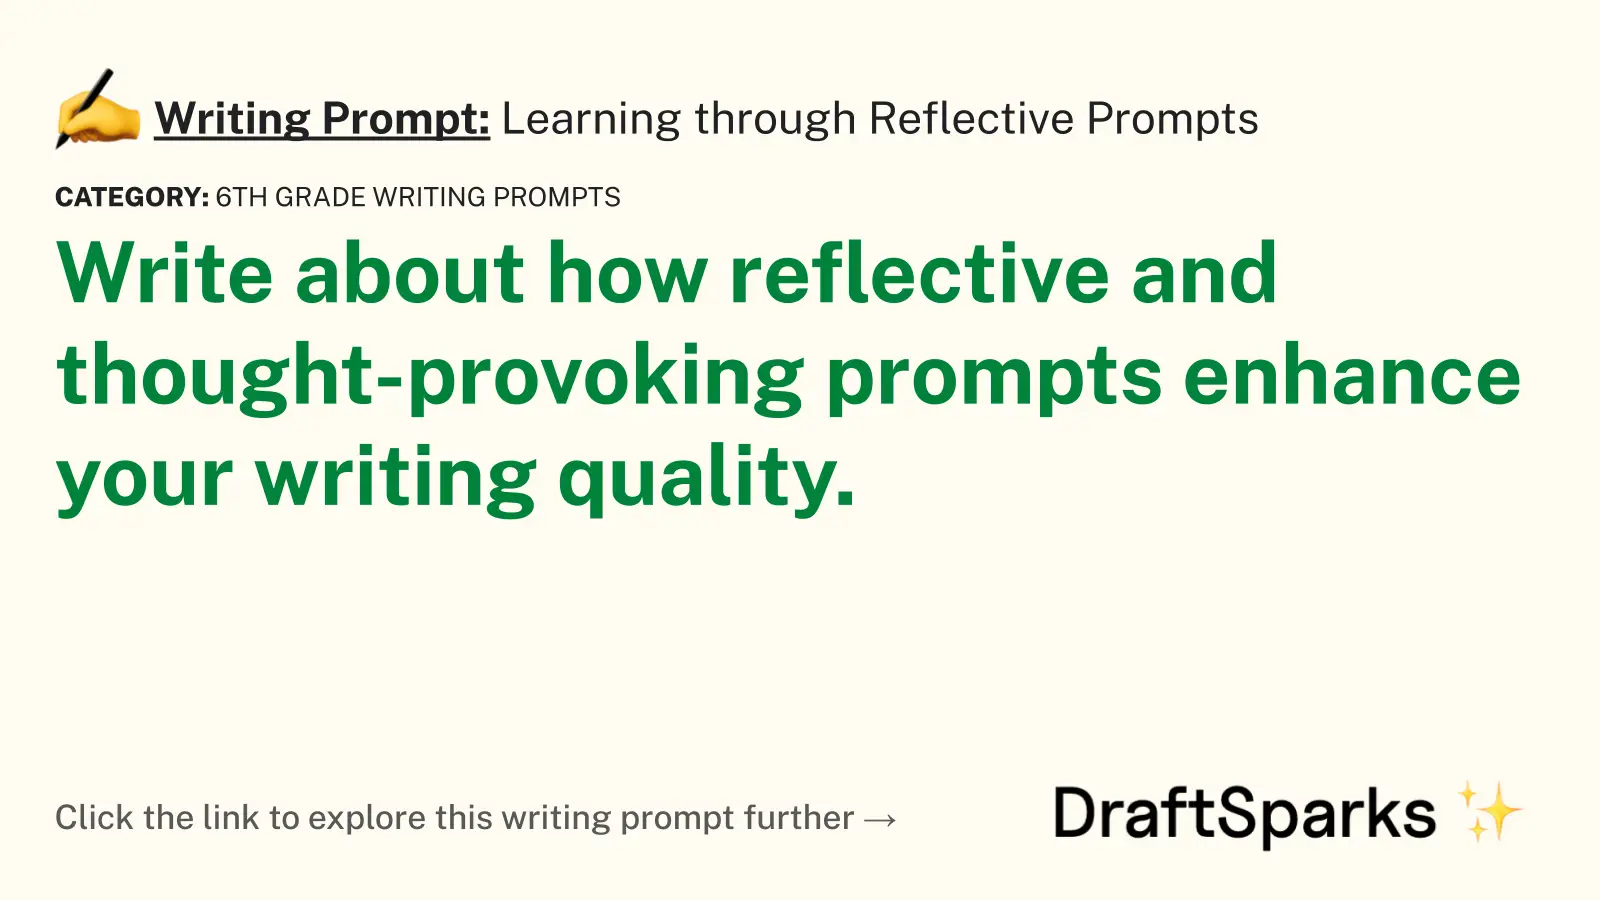 Learning through Reflective Prompts